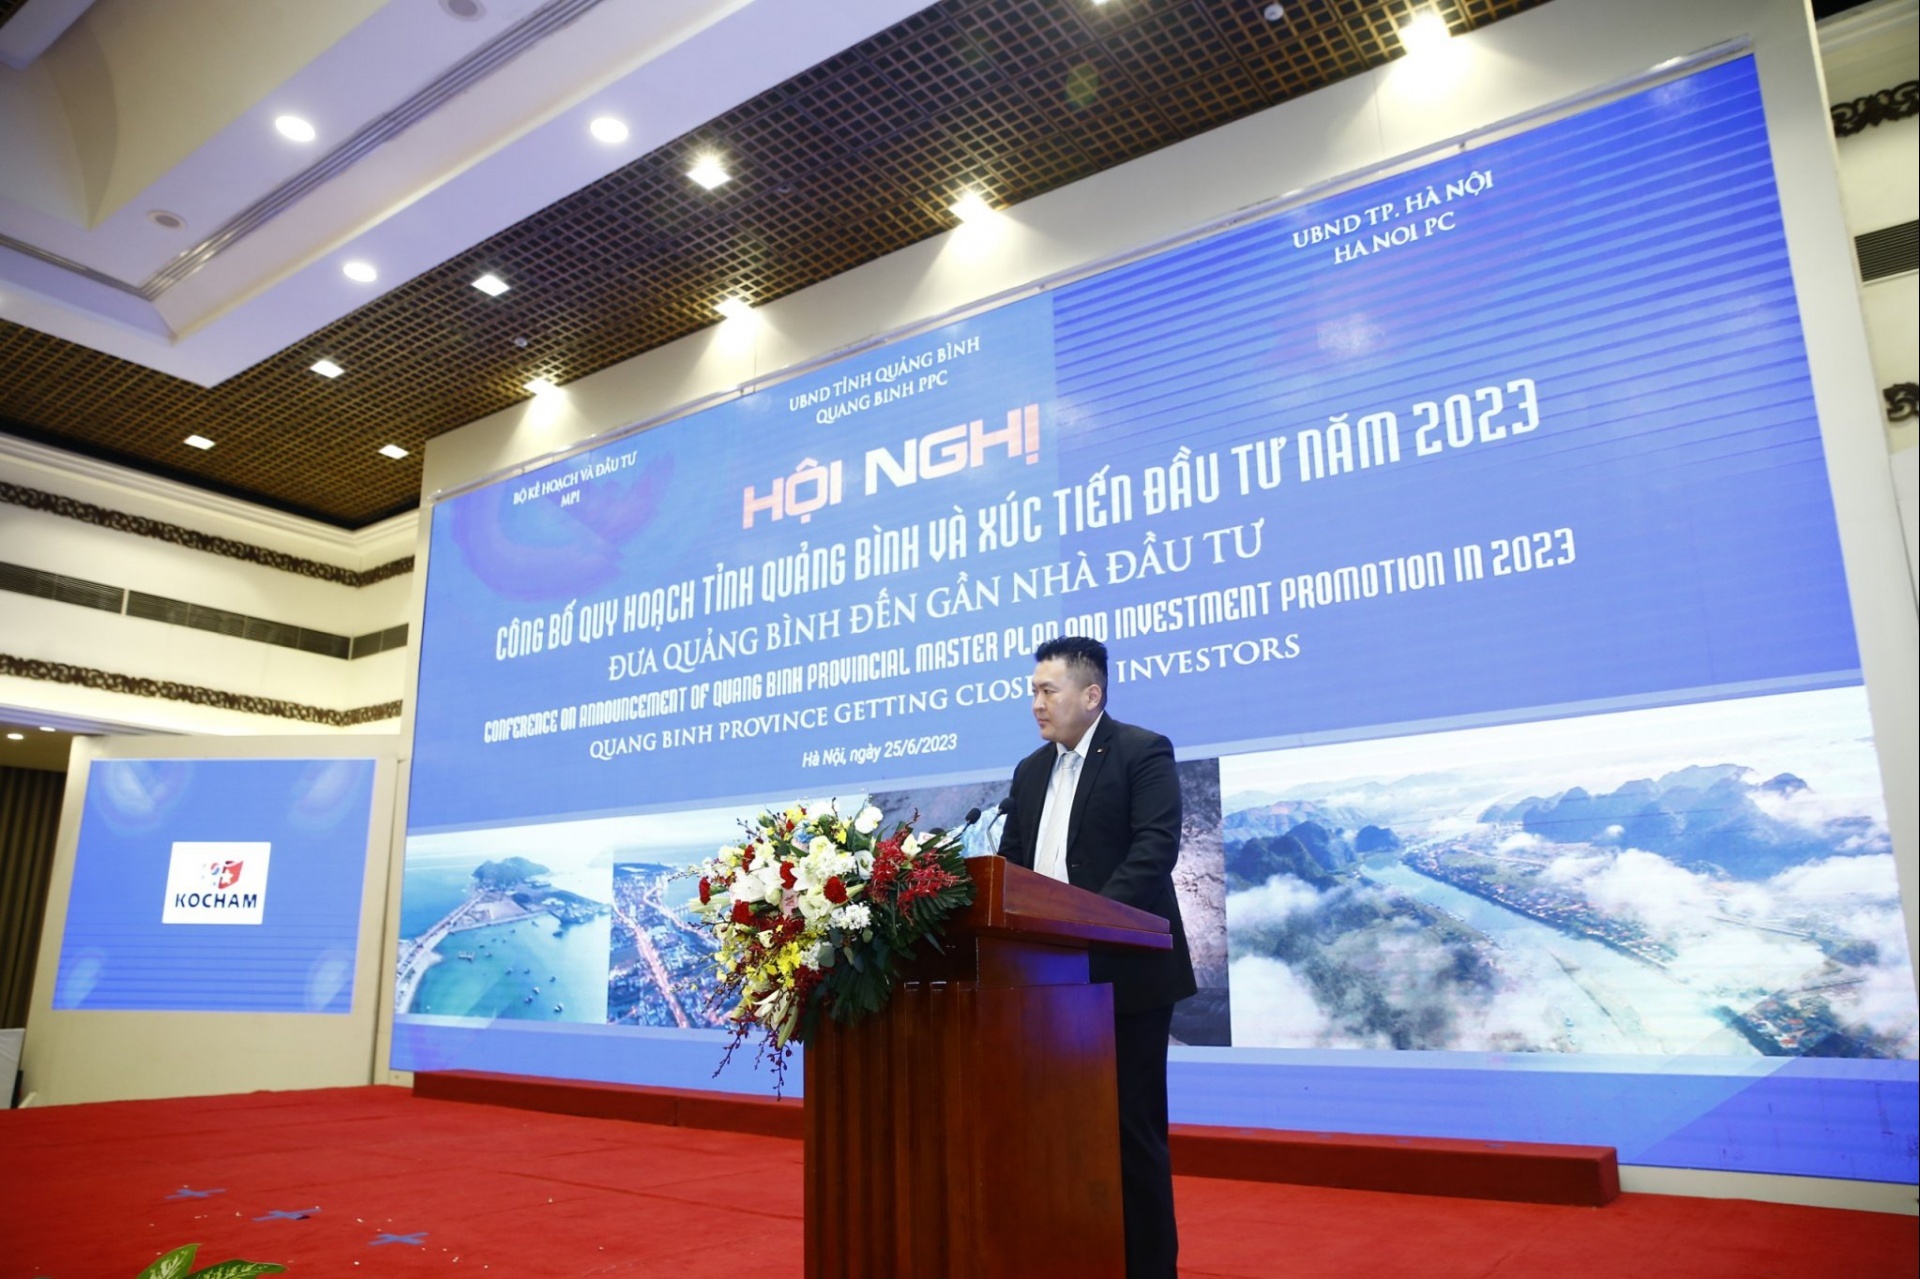 Korean investors paying more attention to Quang Binh